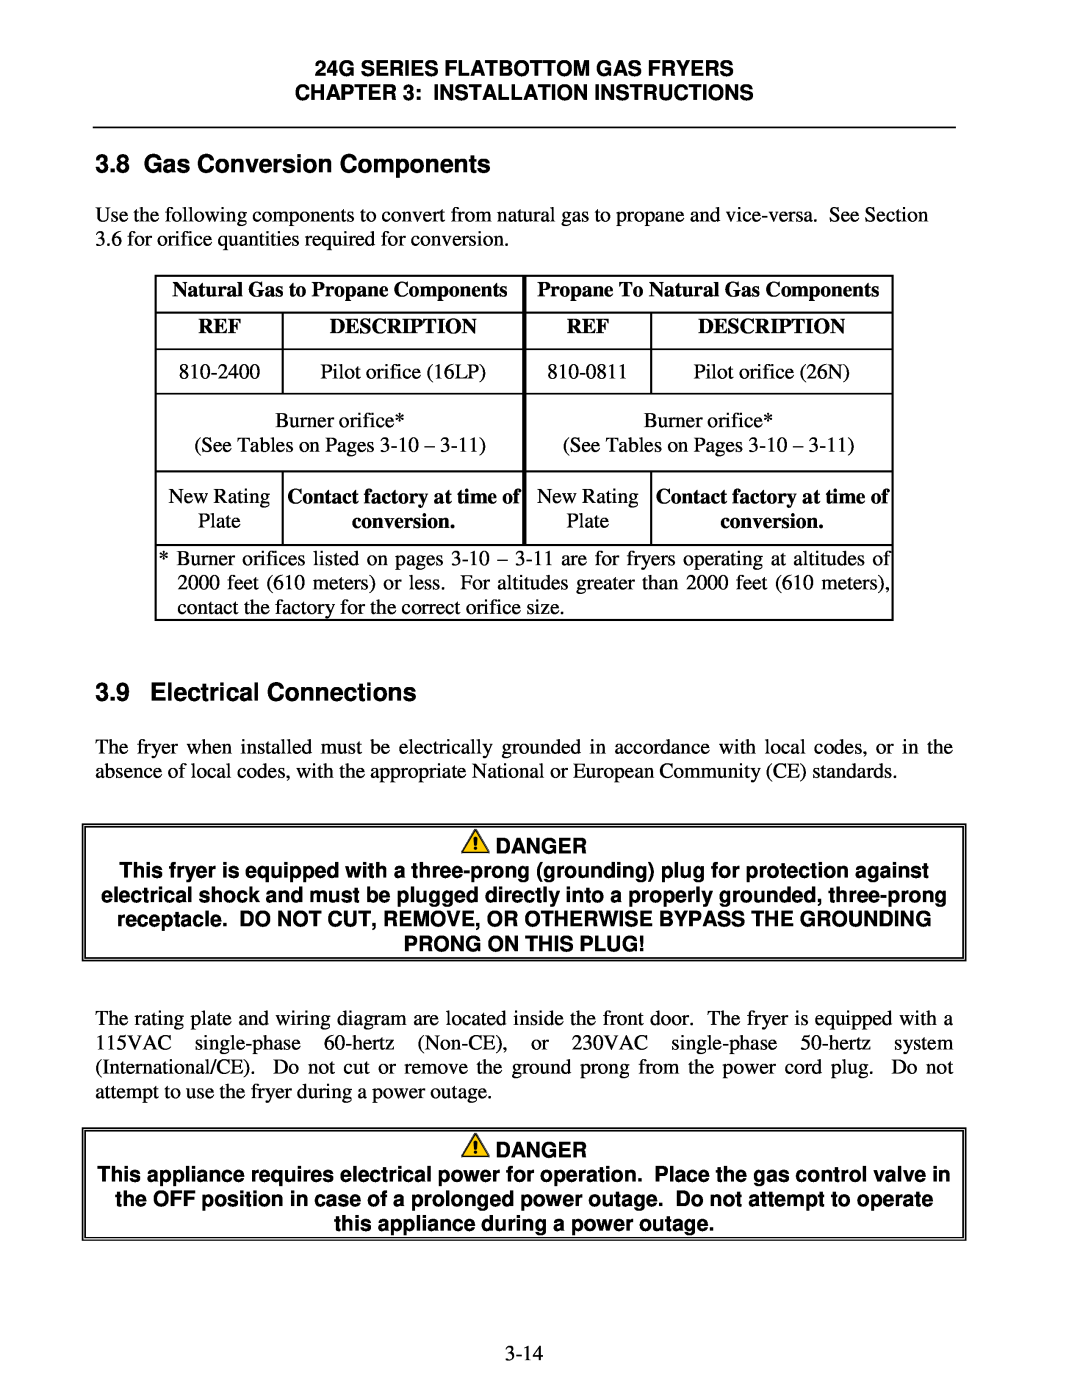 Frymaster 24G Series operation manual Gas Conversion Components, Electrical Connections 